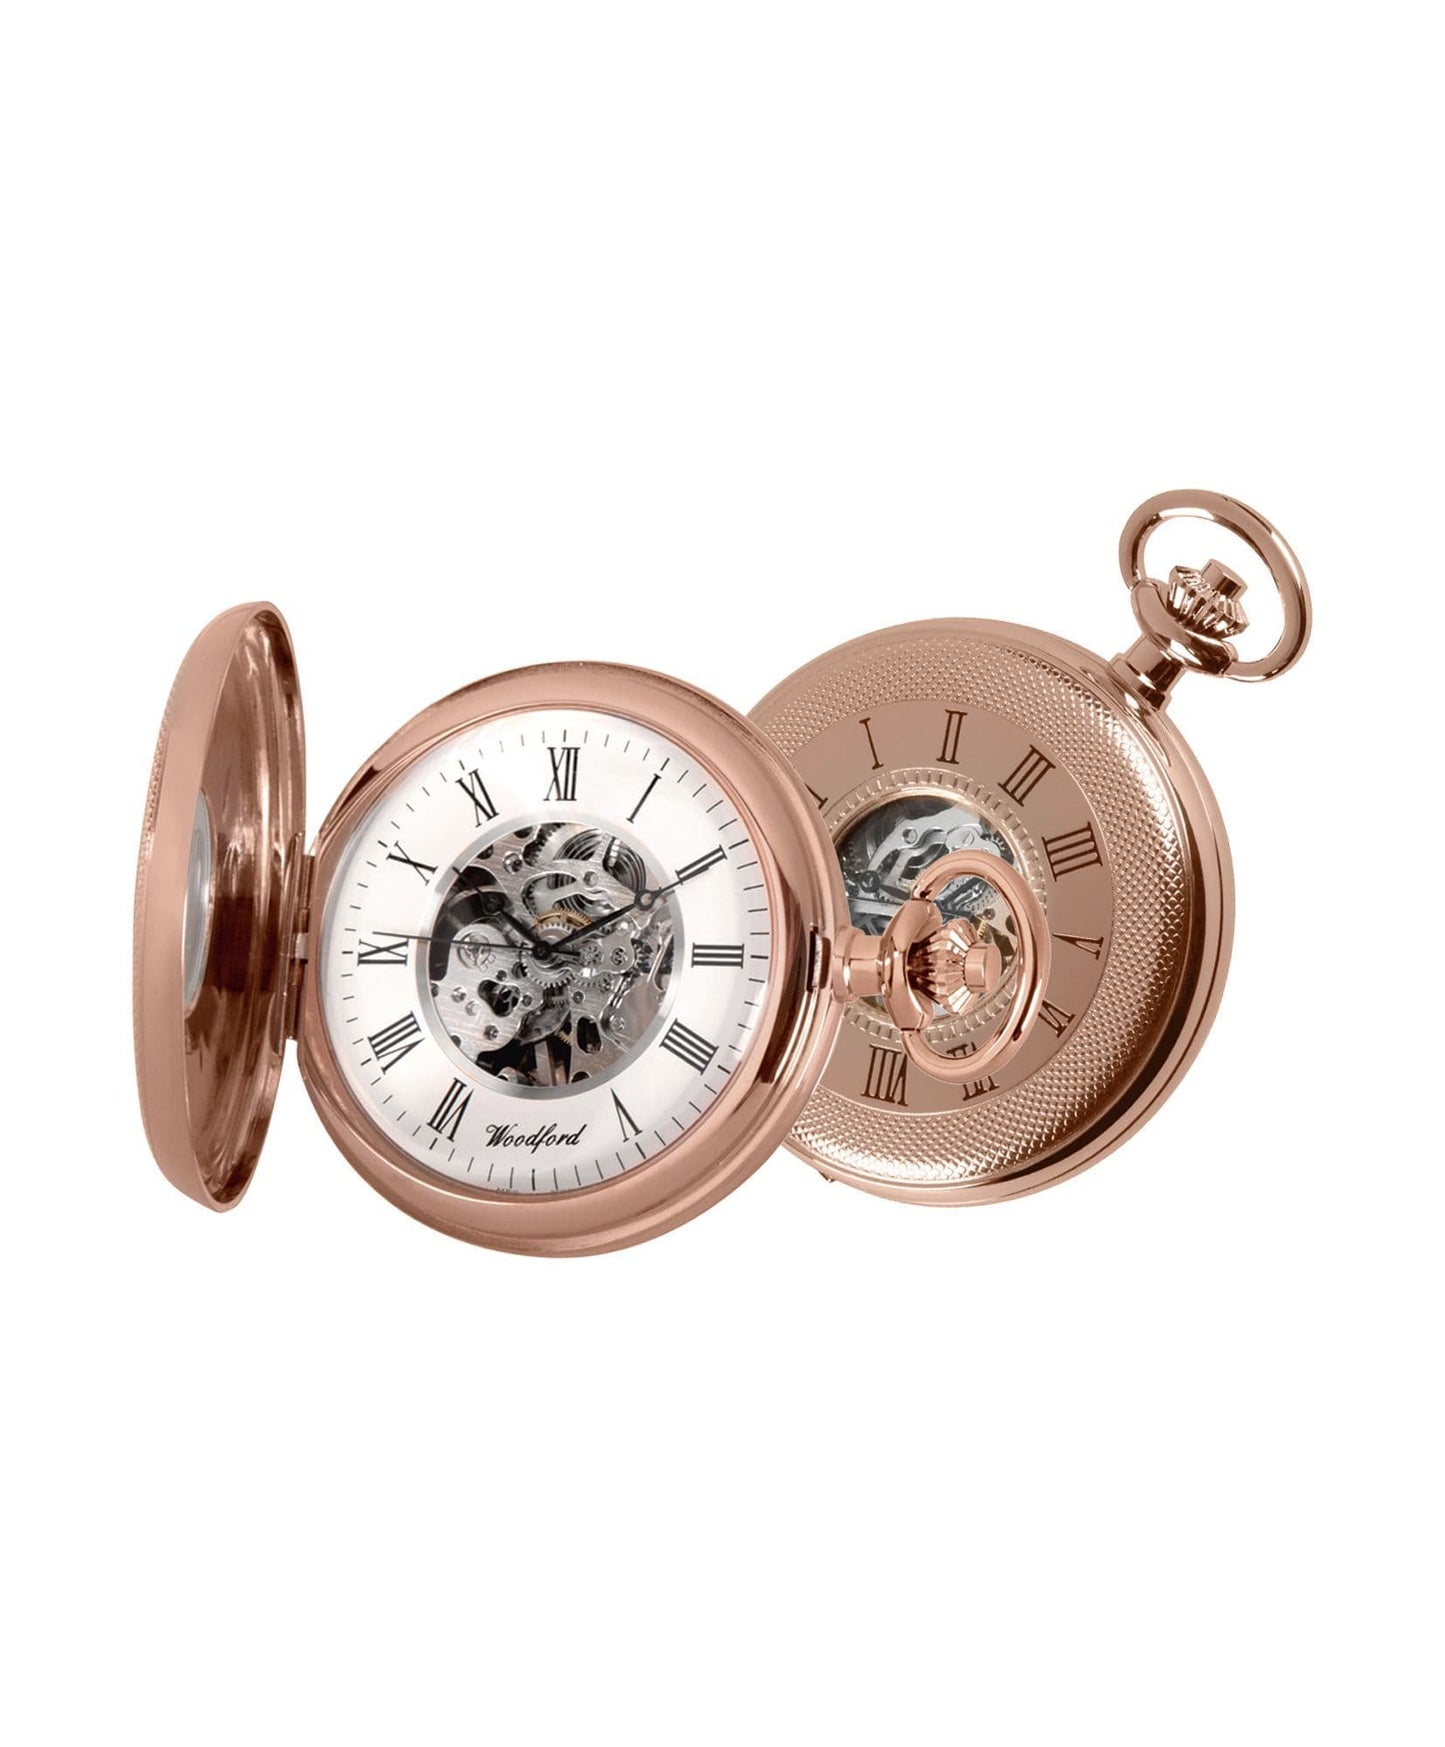 Mechanical Rose Gold Plated Patterned Pocket Watch With Chain